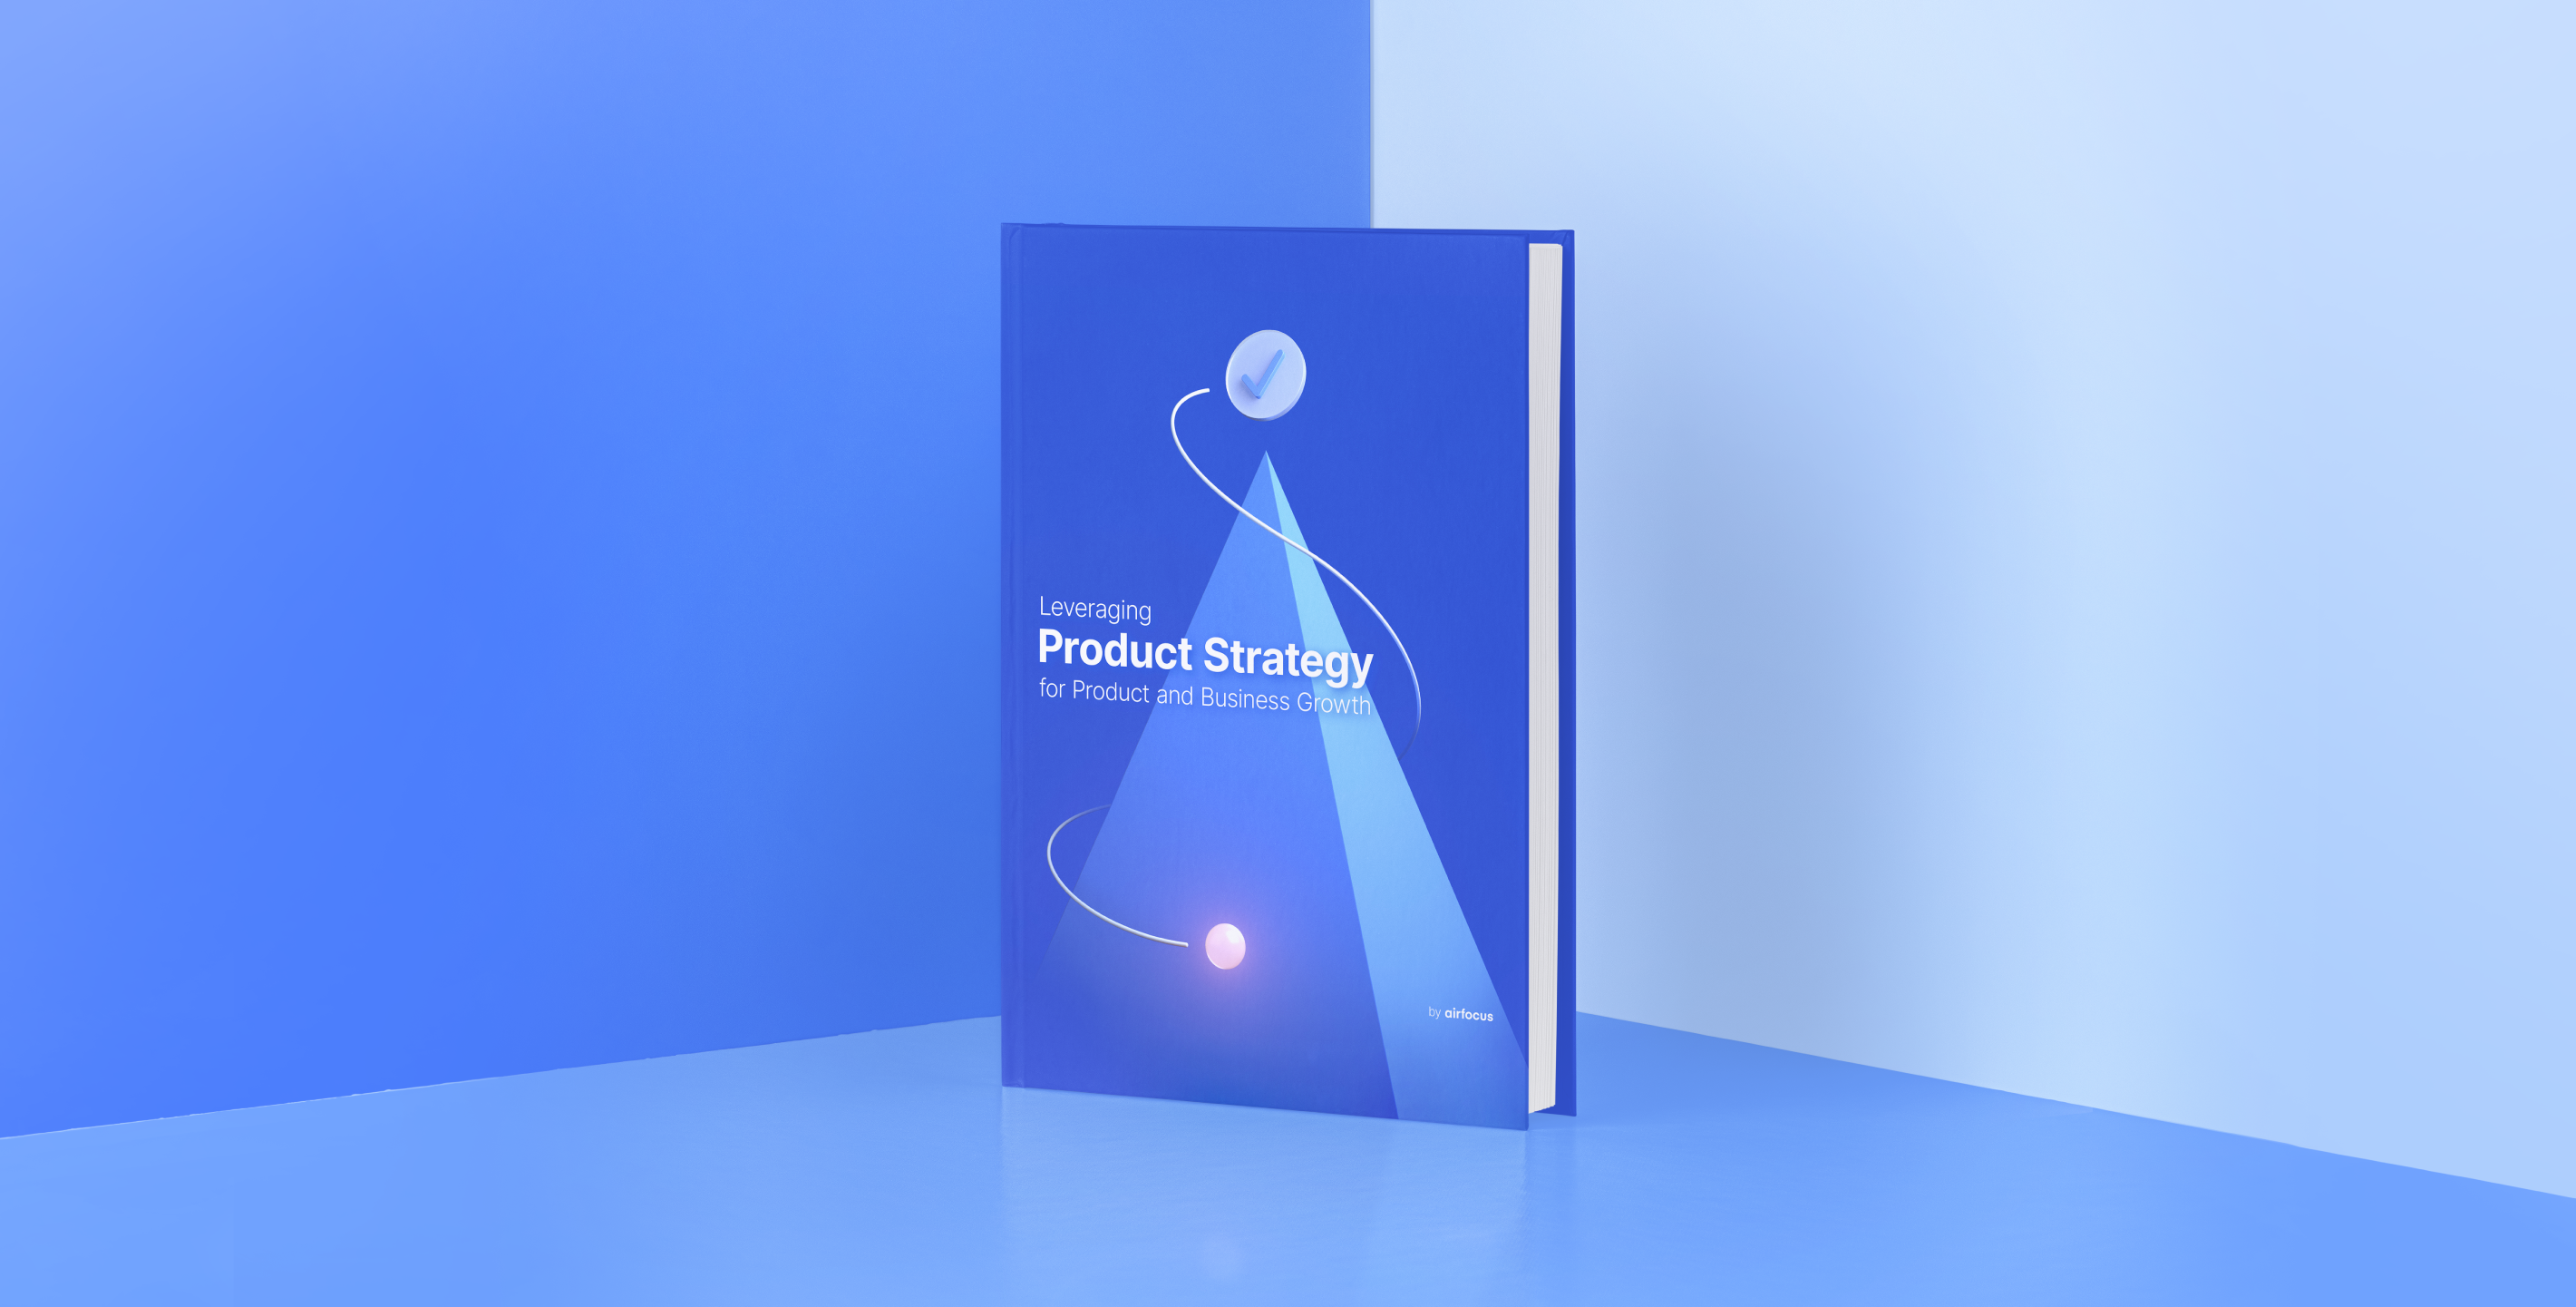 Leveraging Product Strategy for Product and Business Growth